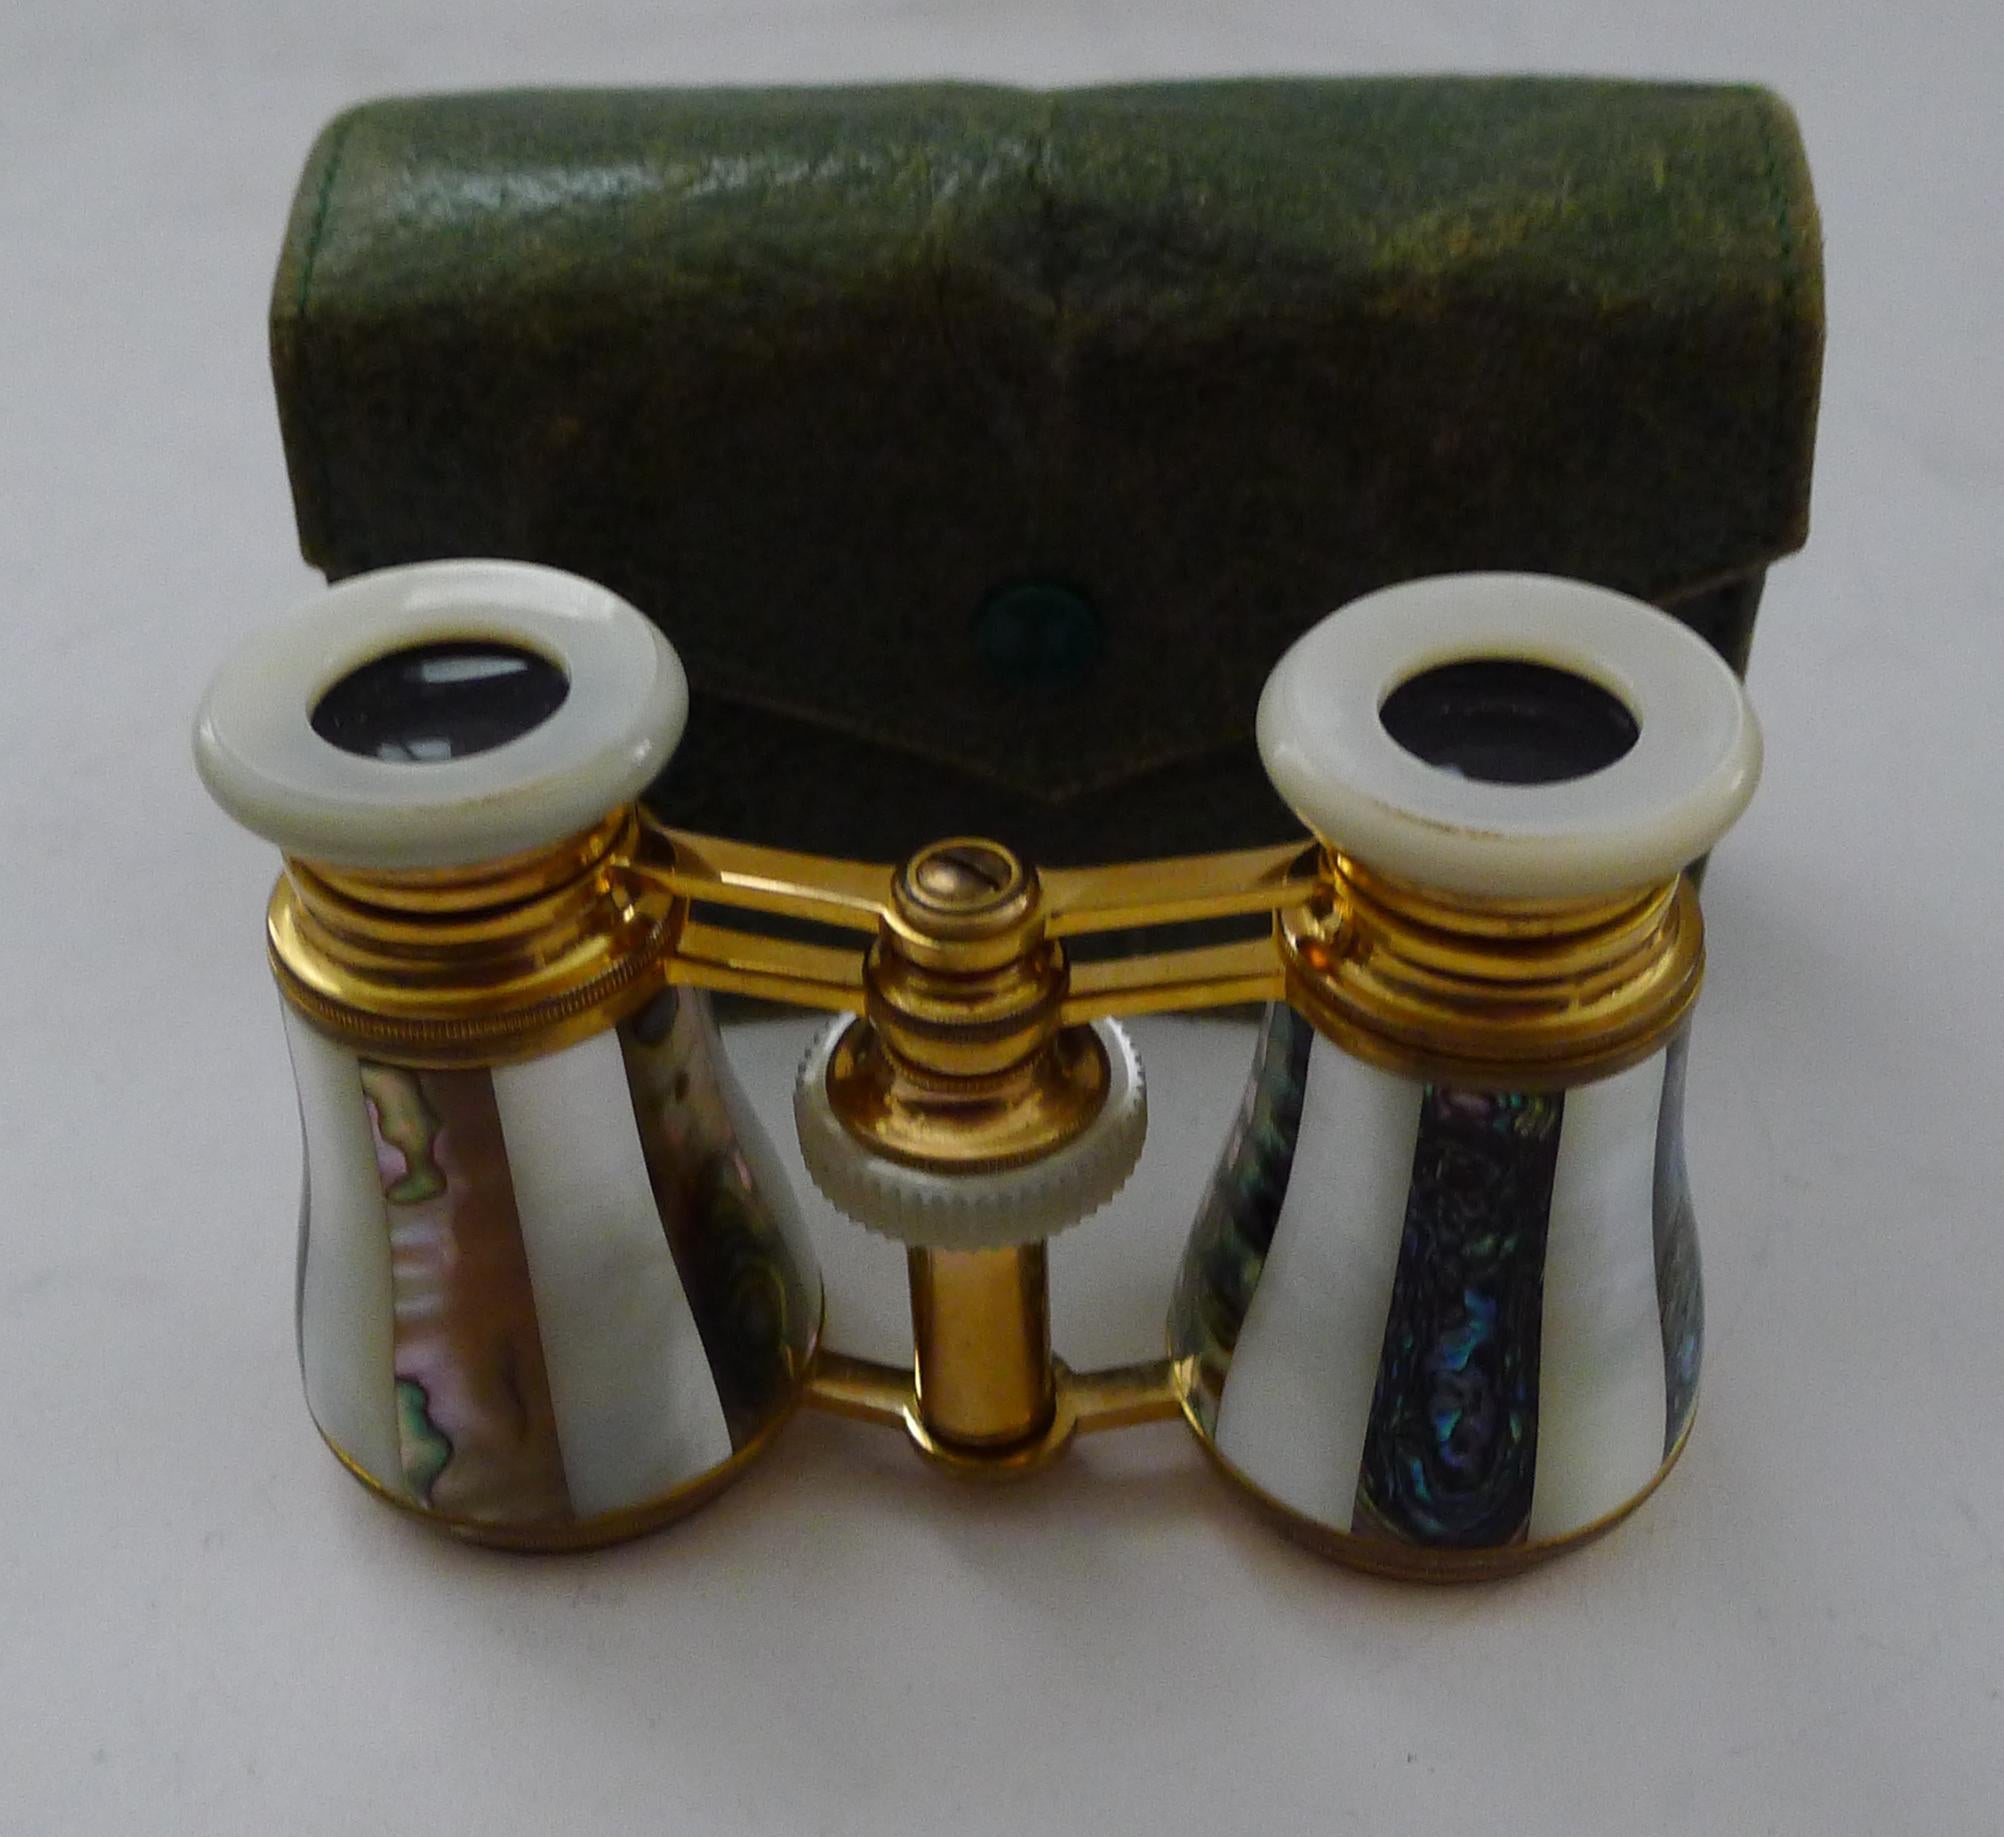 A stunning pair of French Opera glasses made from gilded brass, all intact and original.  The glasses are clad in alternating Mother of Pearl or Nacre shell and Abalone shell, creating a striped design.

The underside of the frame is struck 